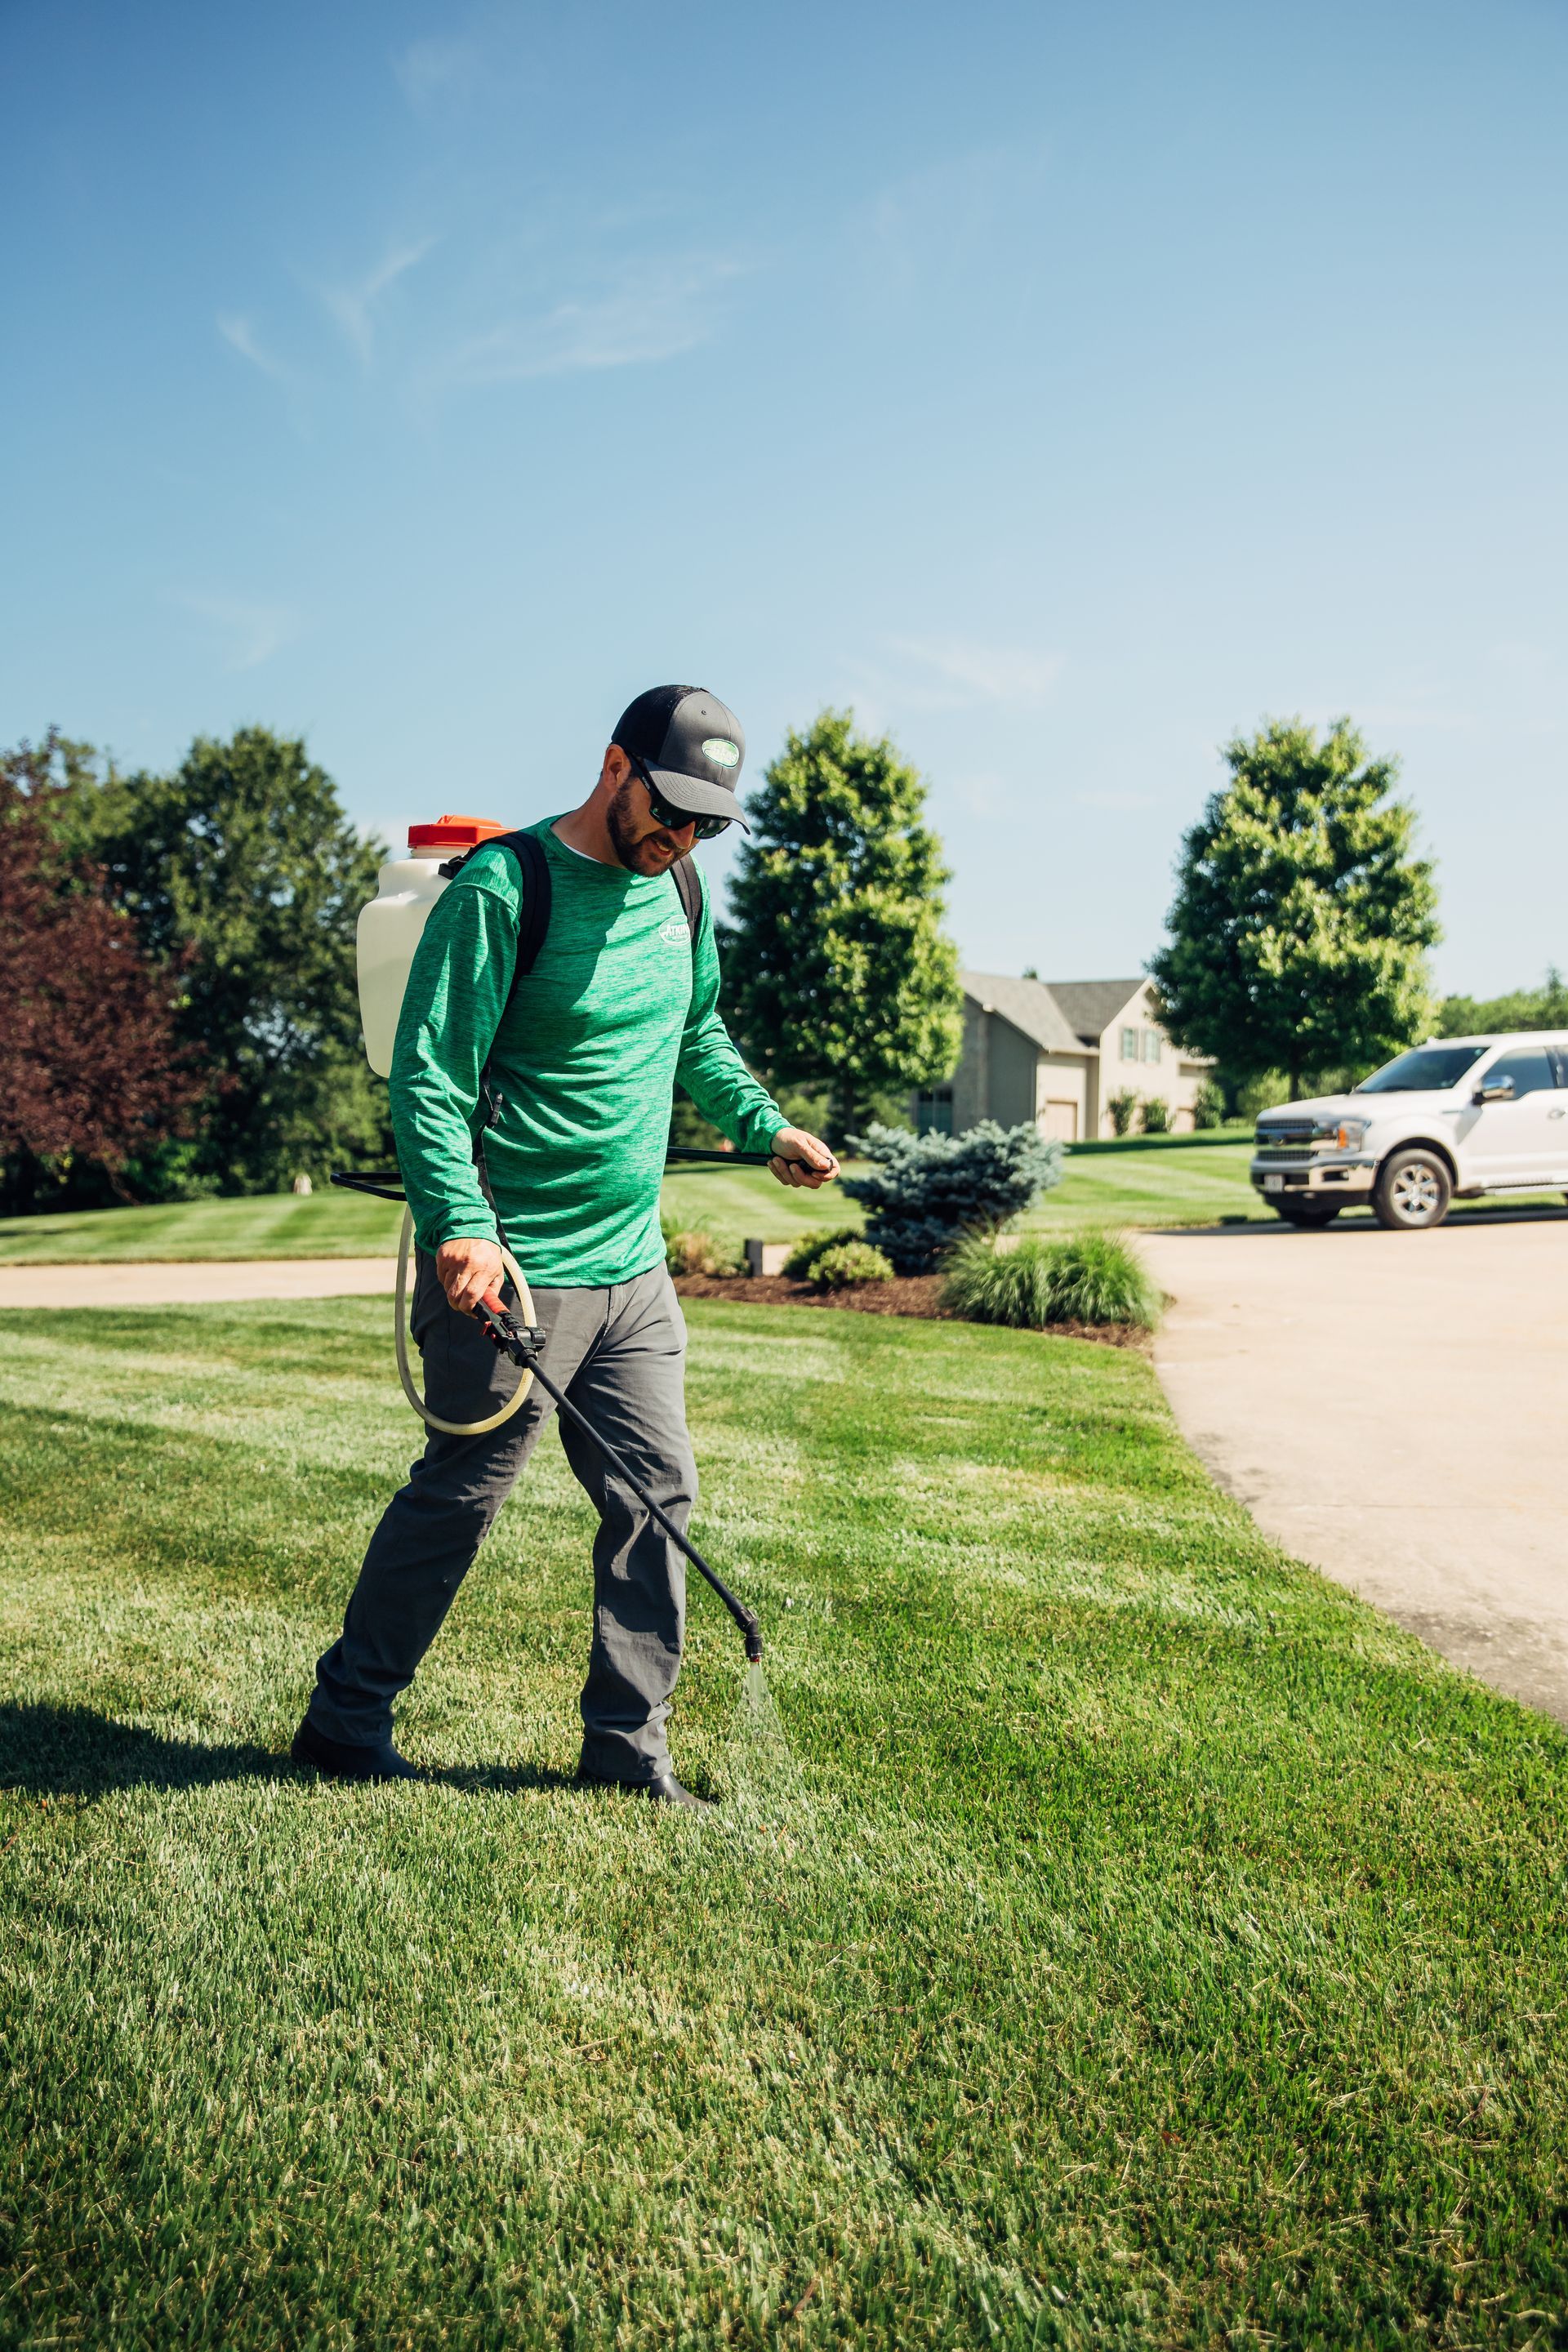 Do You Want A Lawn Without Weeds? Call Atkins in Columbia, MO for Weed Control Today.